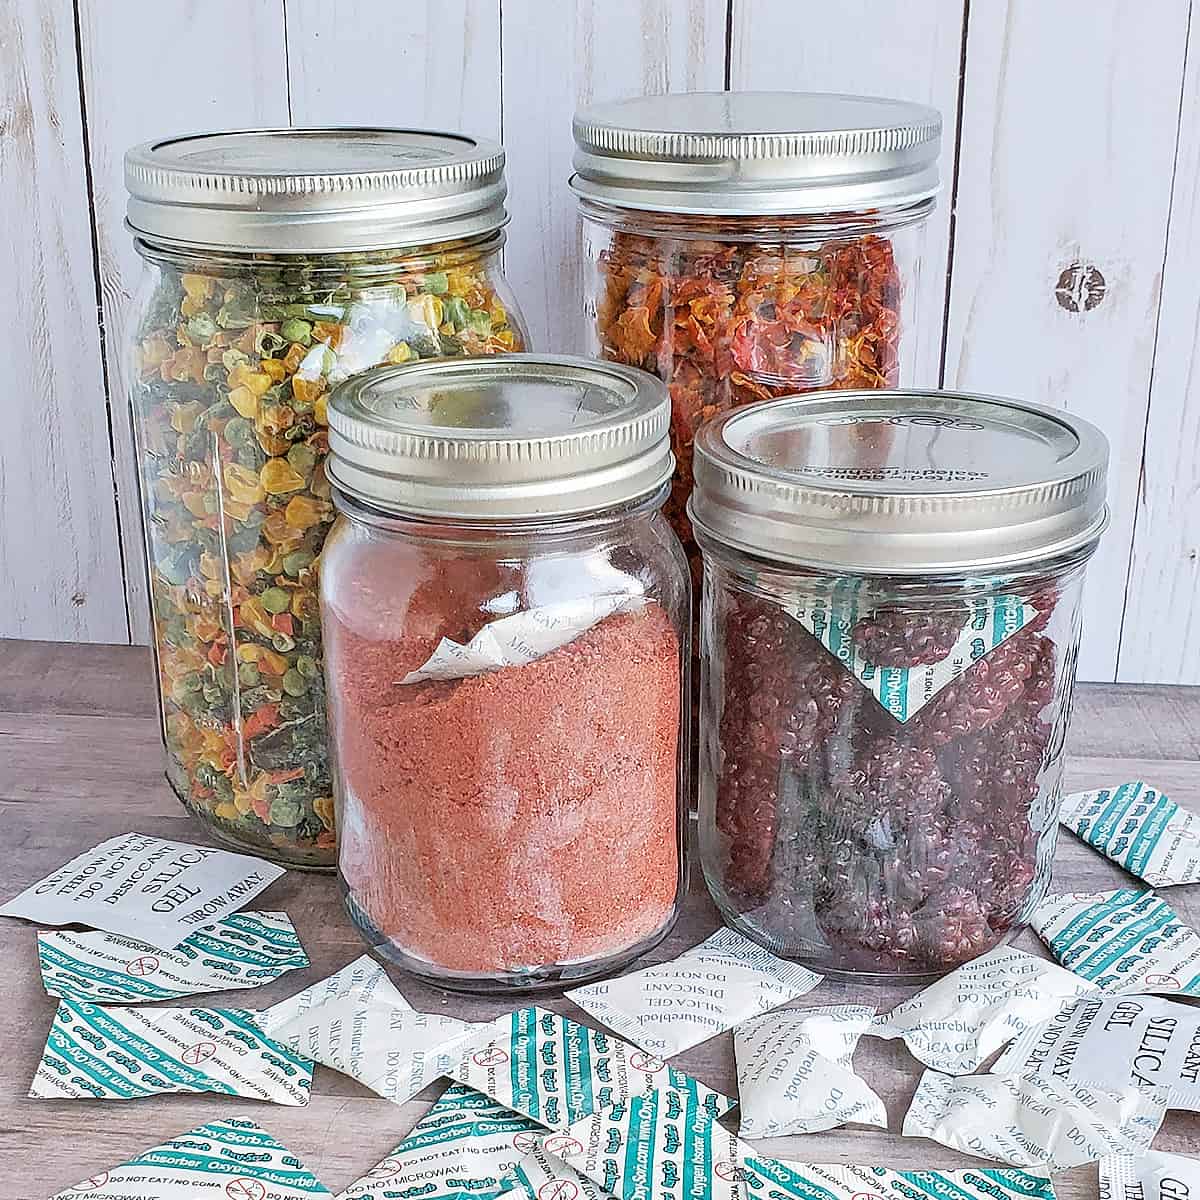 How to preserve food – making jam, pickling, dehydrating